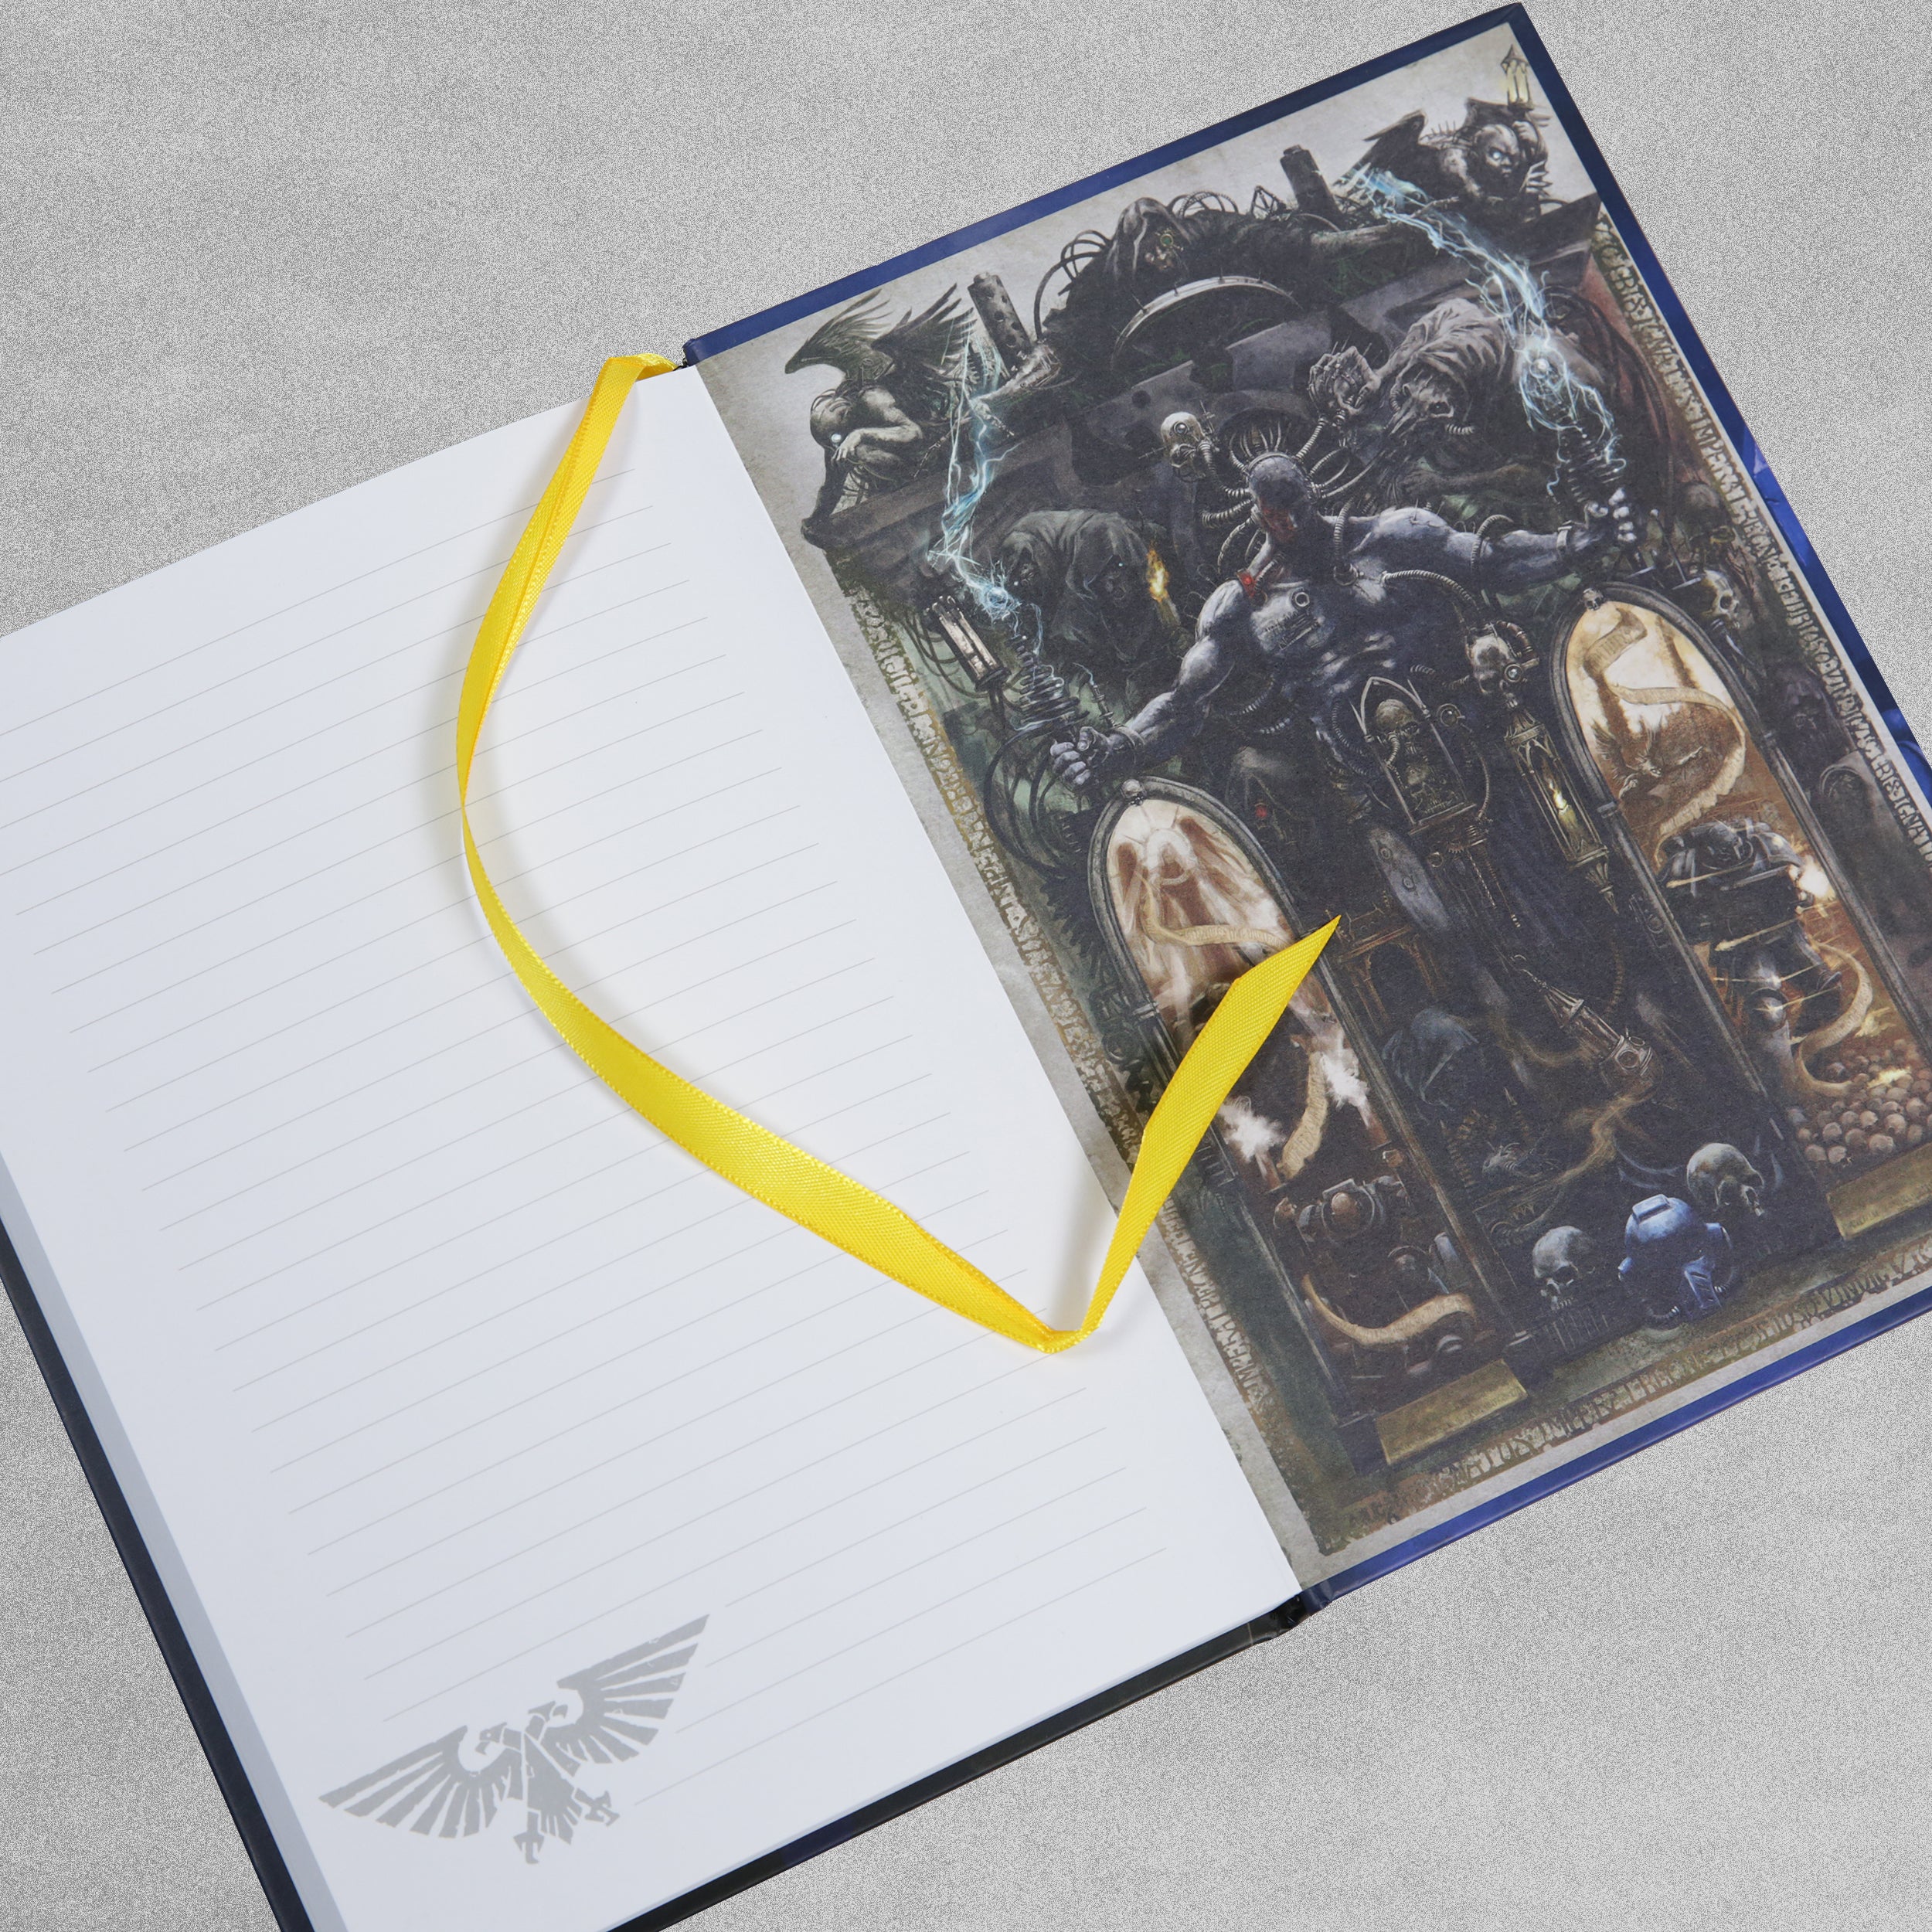 Warhammer 40,000 Ultramarines Note Book (180 pages)